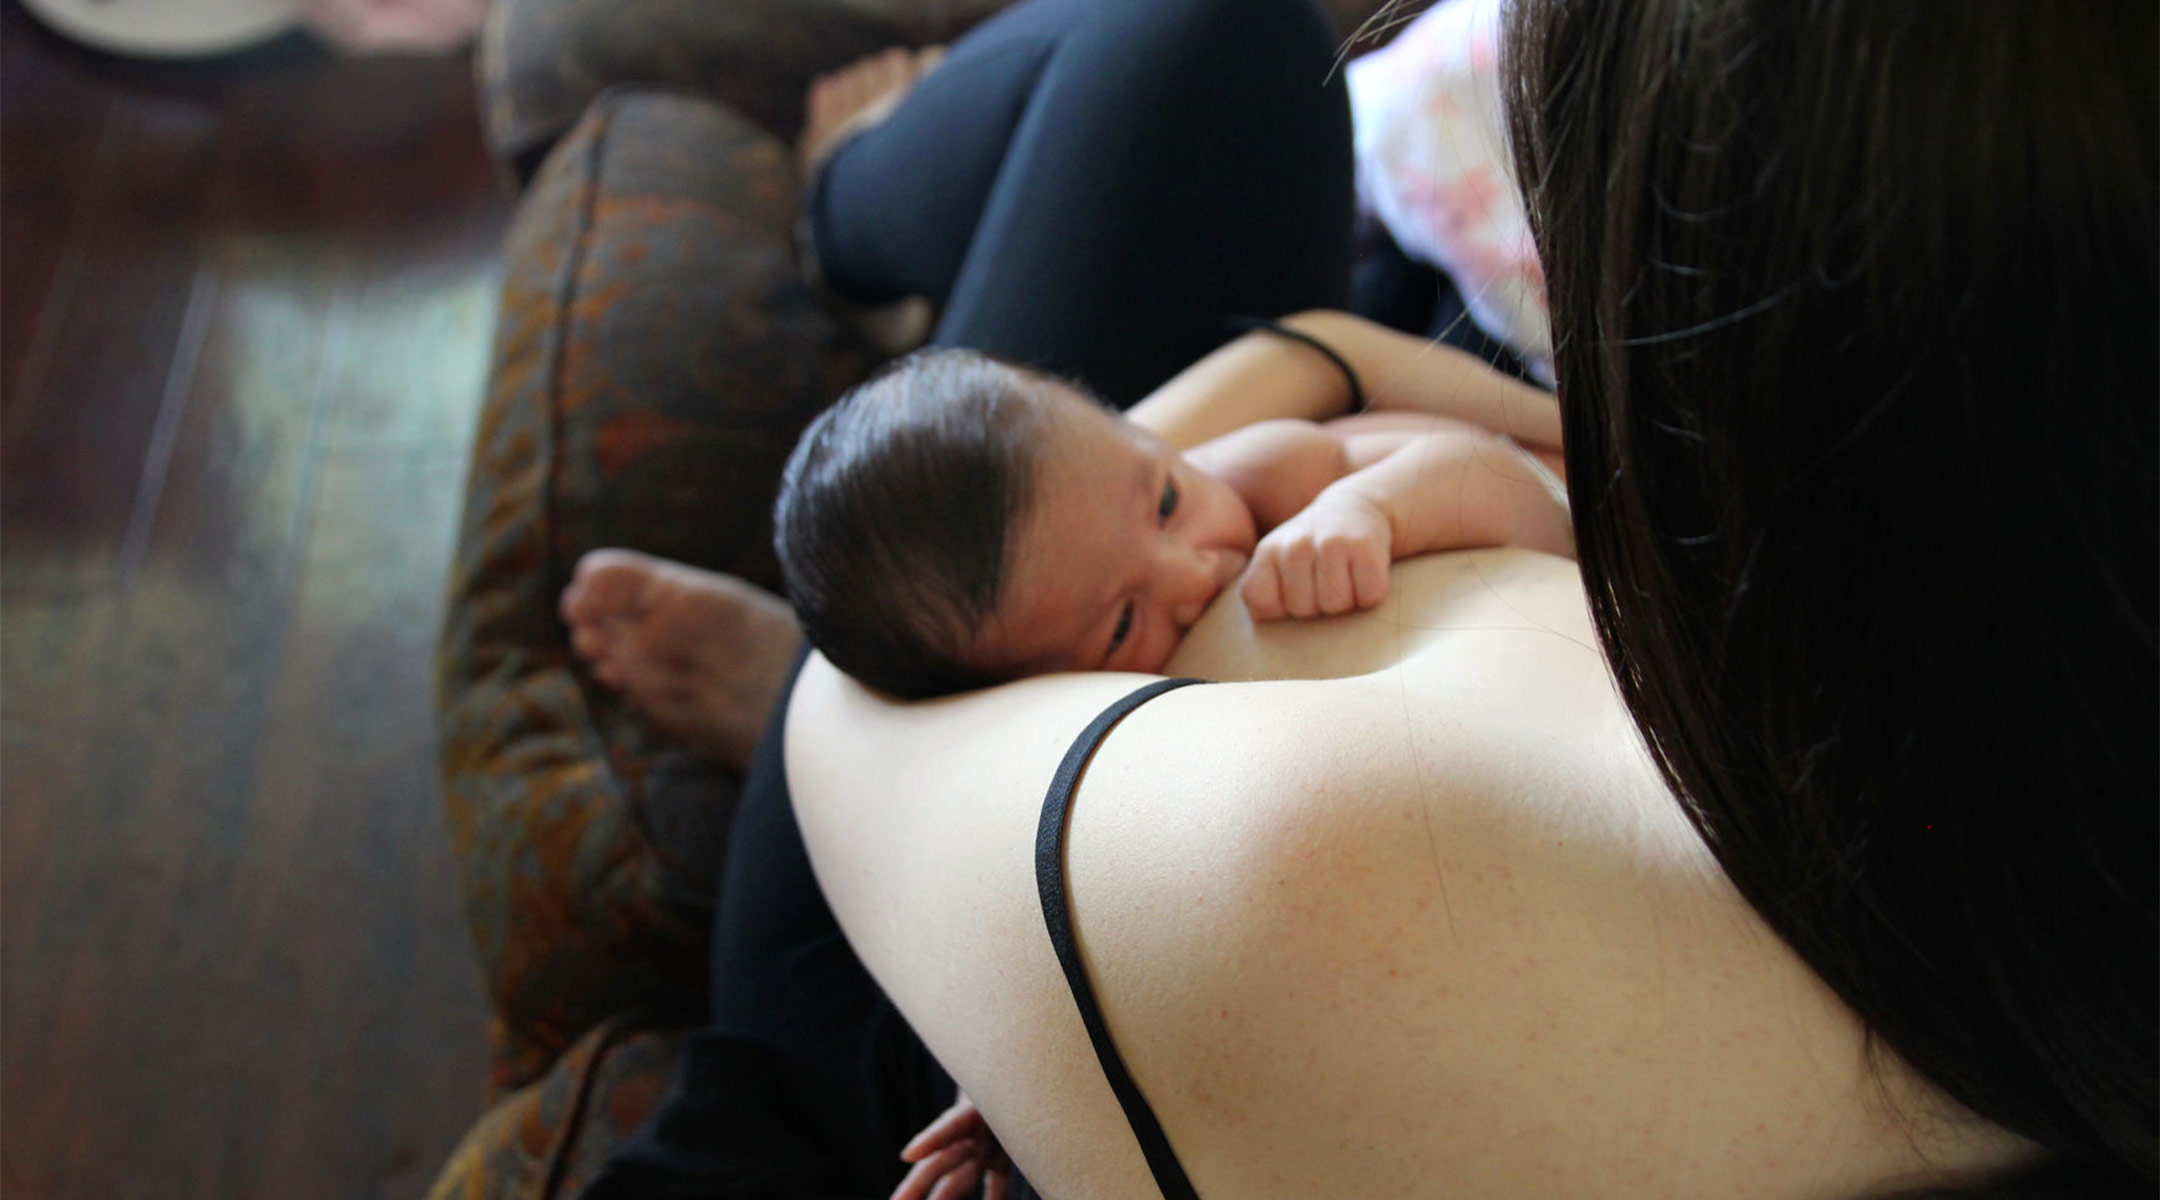 How to Lose Weight While Breastfeeding